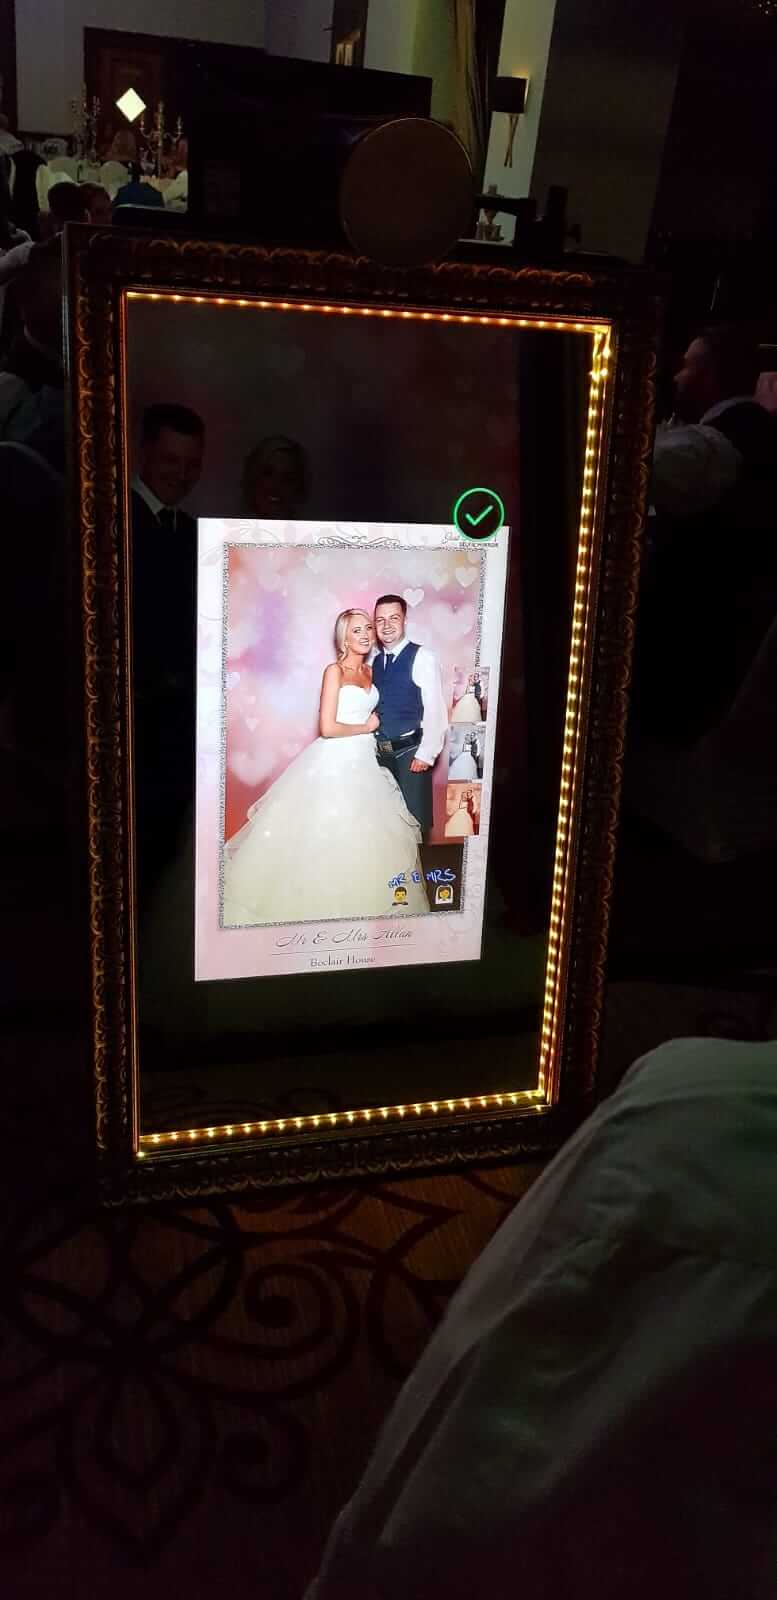 Happily married couple posing for Just A-Pose selfie mirror showing on the mirror screen